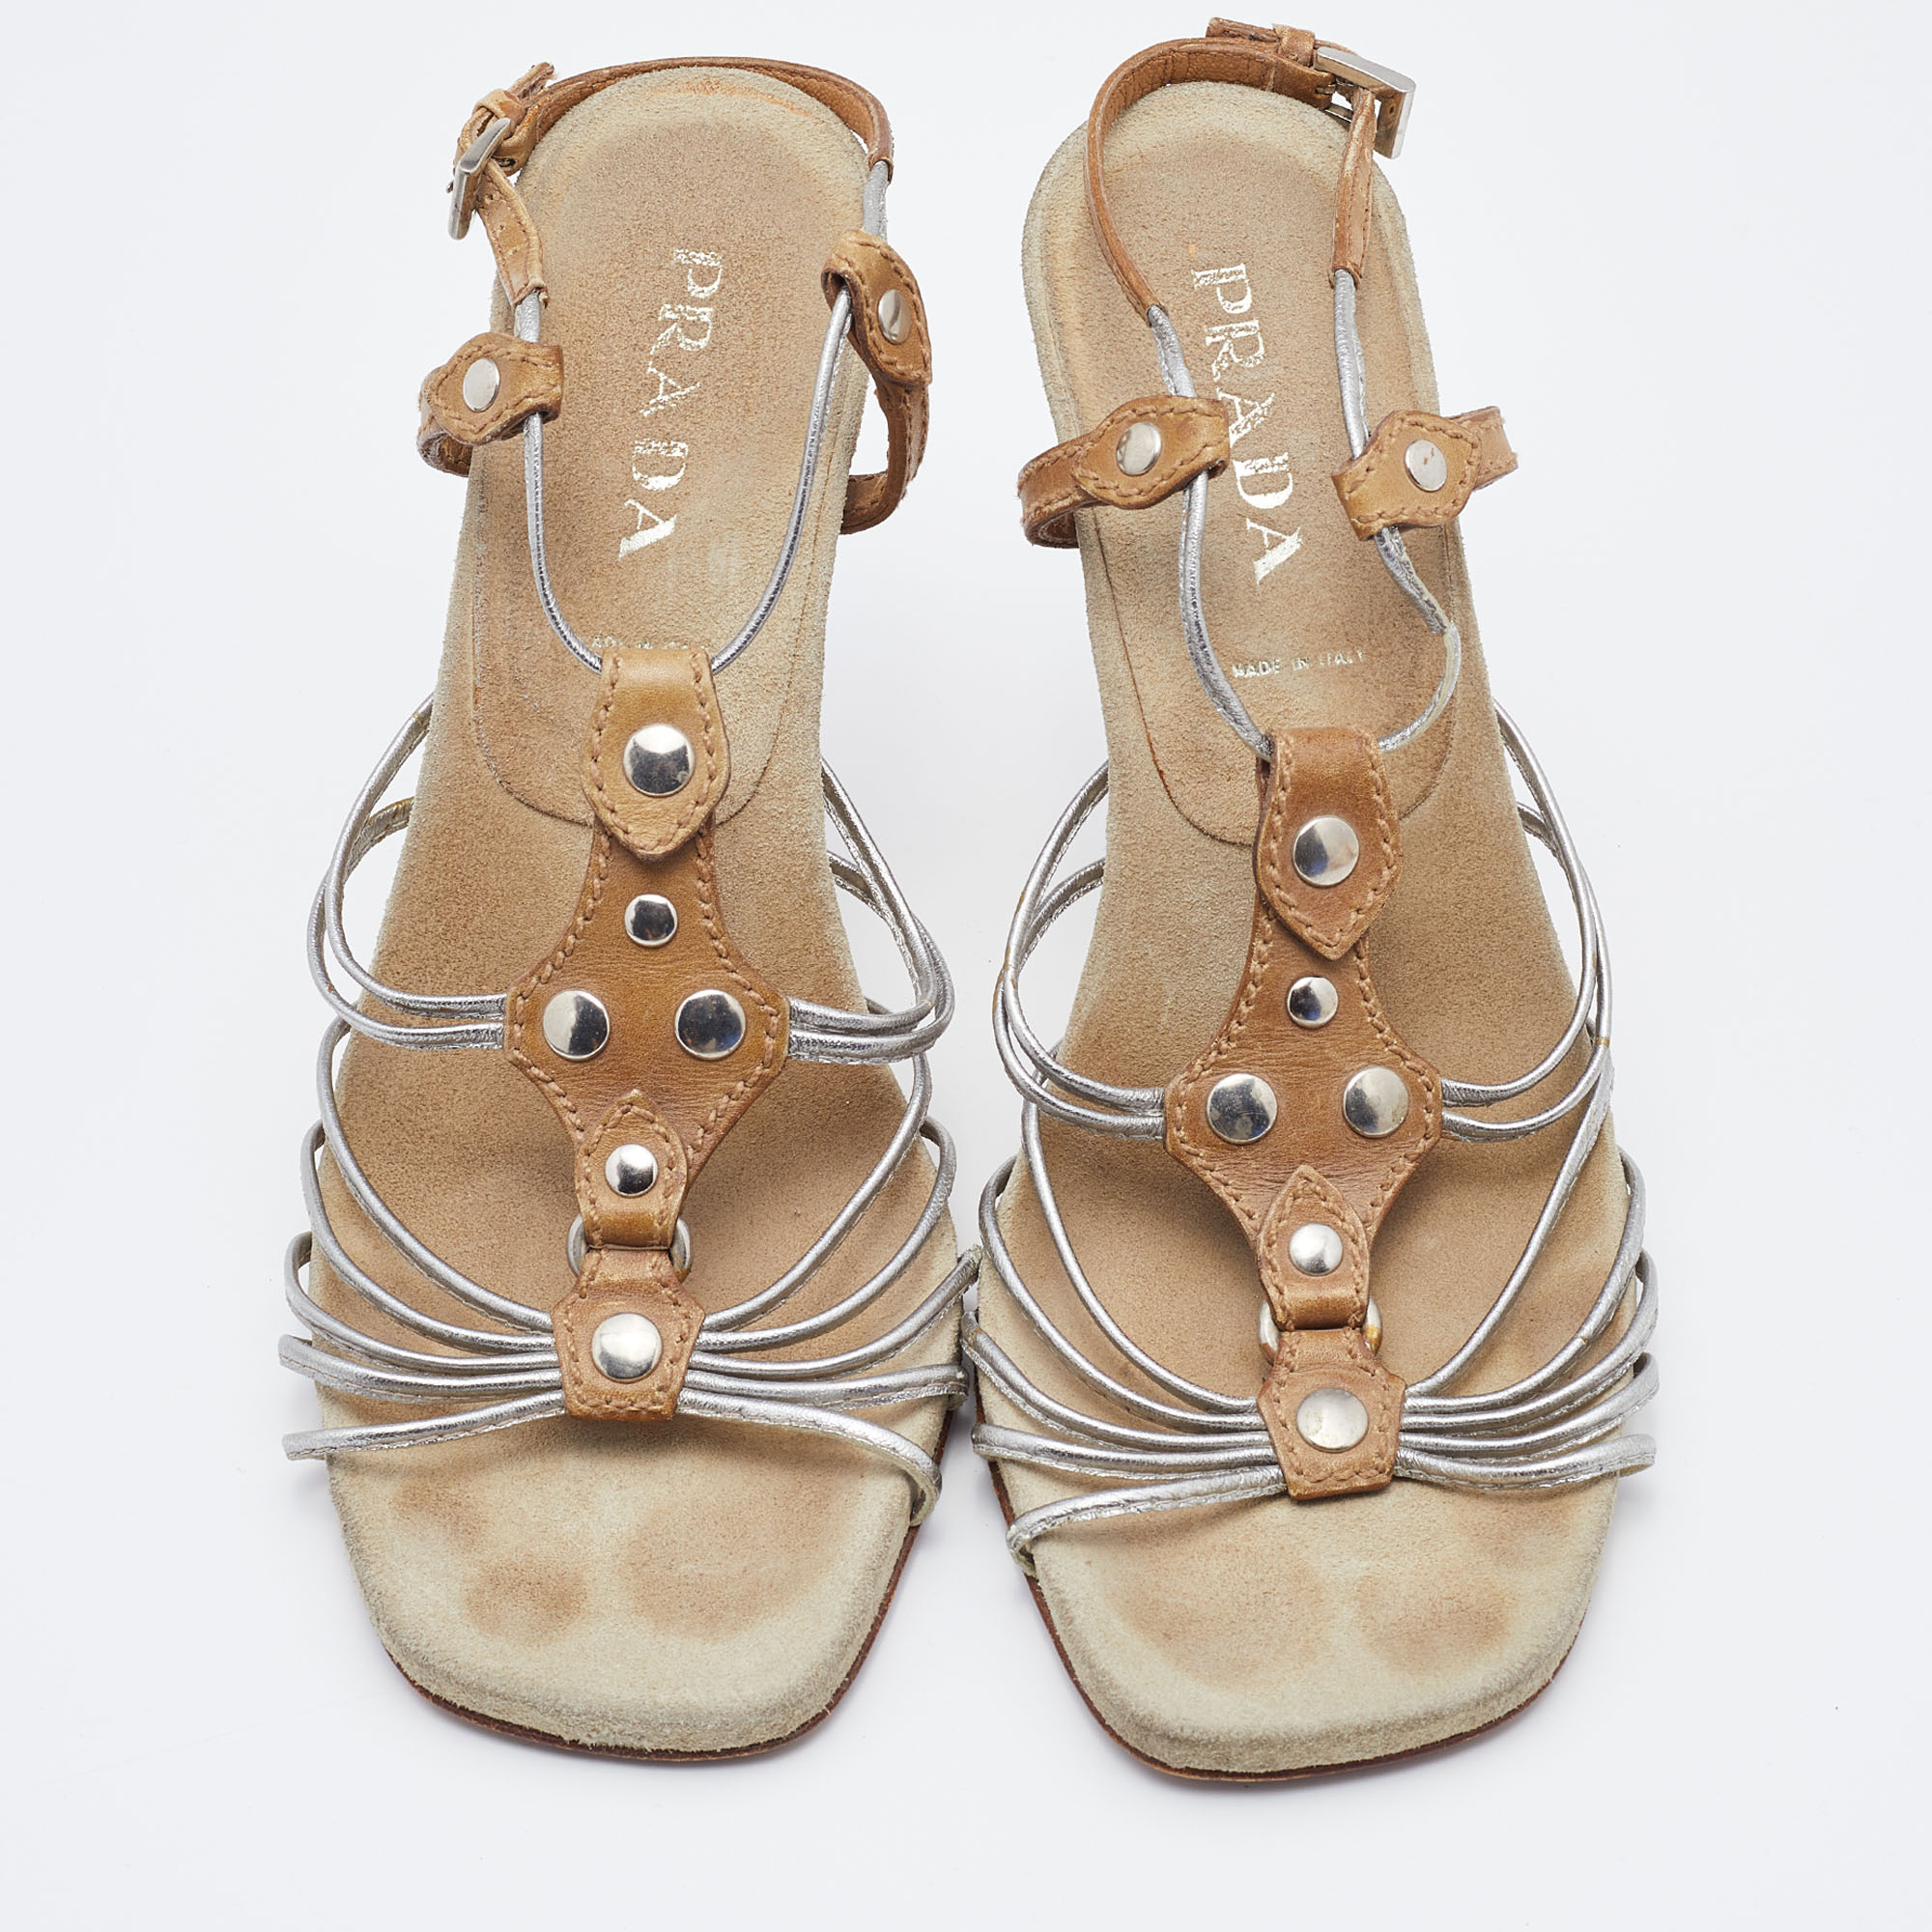 Prada Silver/Brown Leather Strappy Sandals Size 36.5